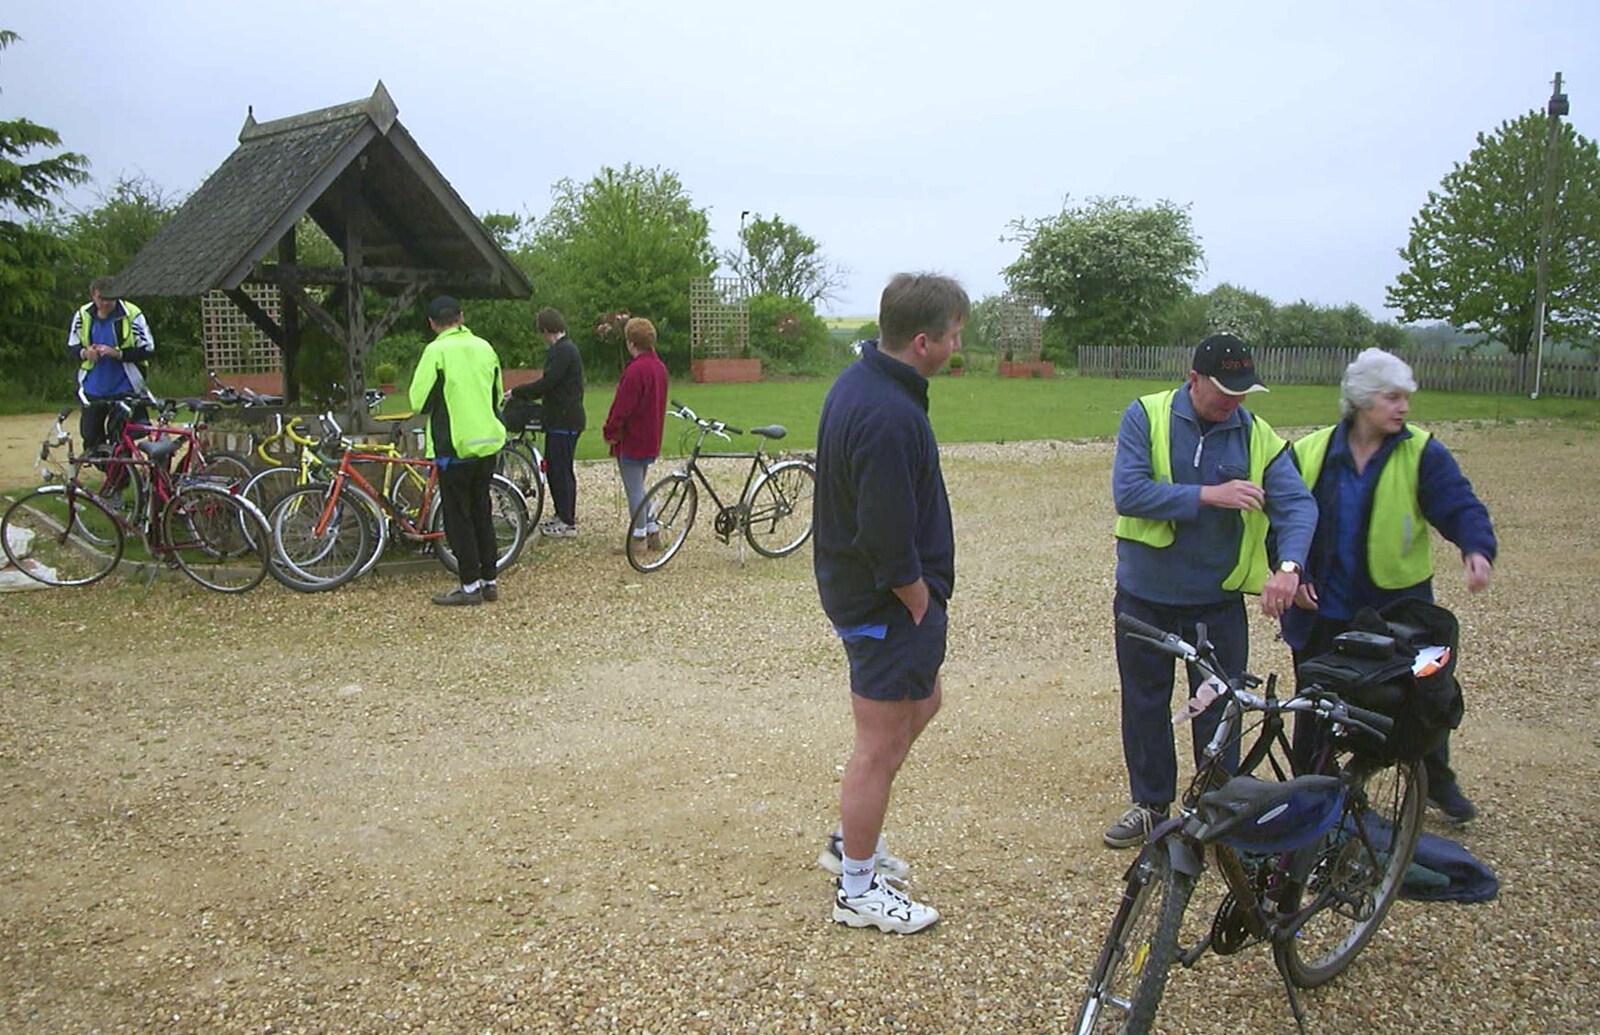 The BSCC Bike Ride, Shefford, Bedford - 11th May 2002: Assmebling in the morning